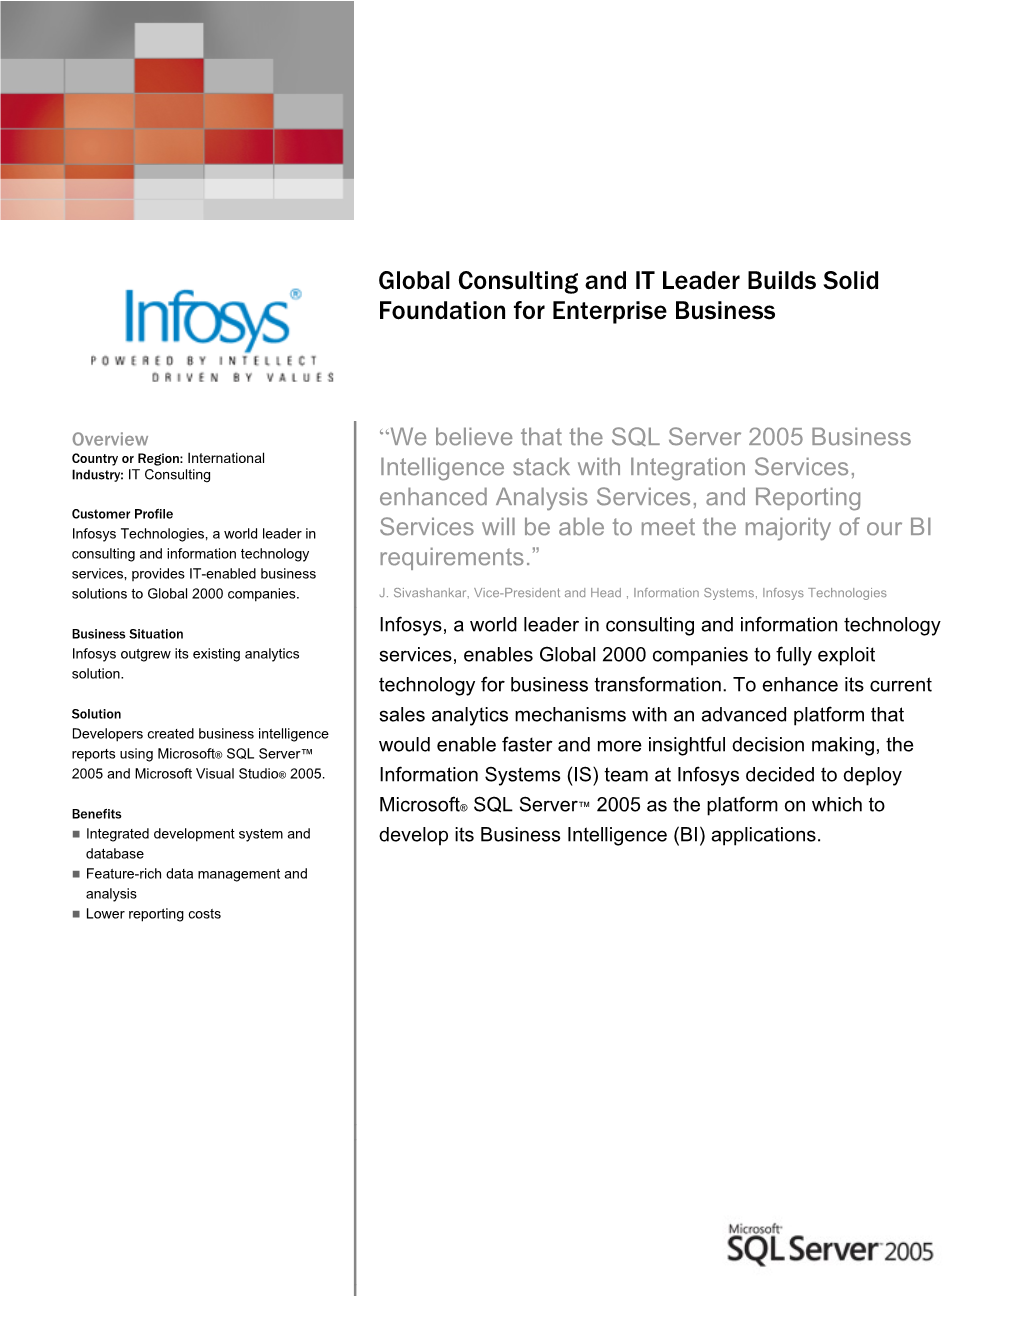 Global Consulting and IT Leader Builds Solid Foundation for Enterprise Business